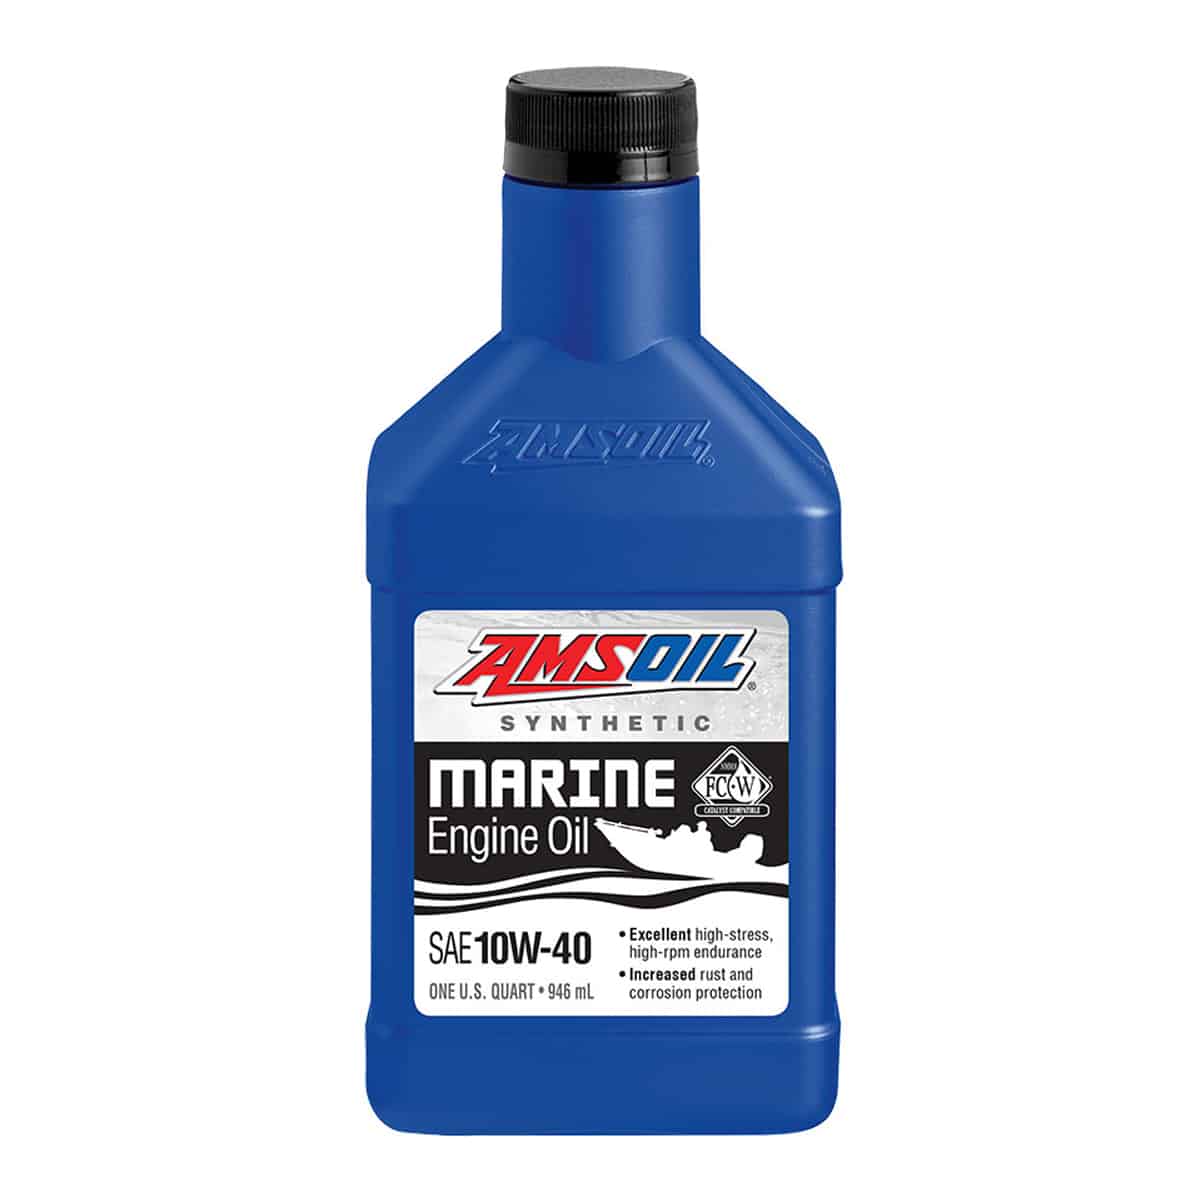 AMSOIL Synthetic Marine Engine Oil